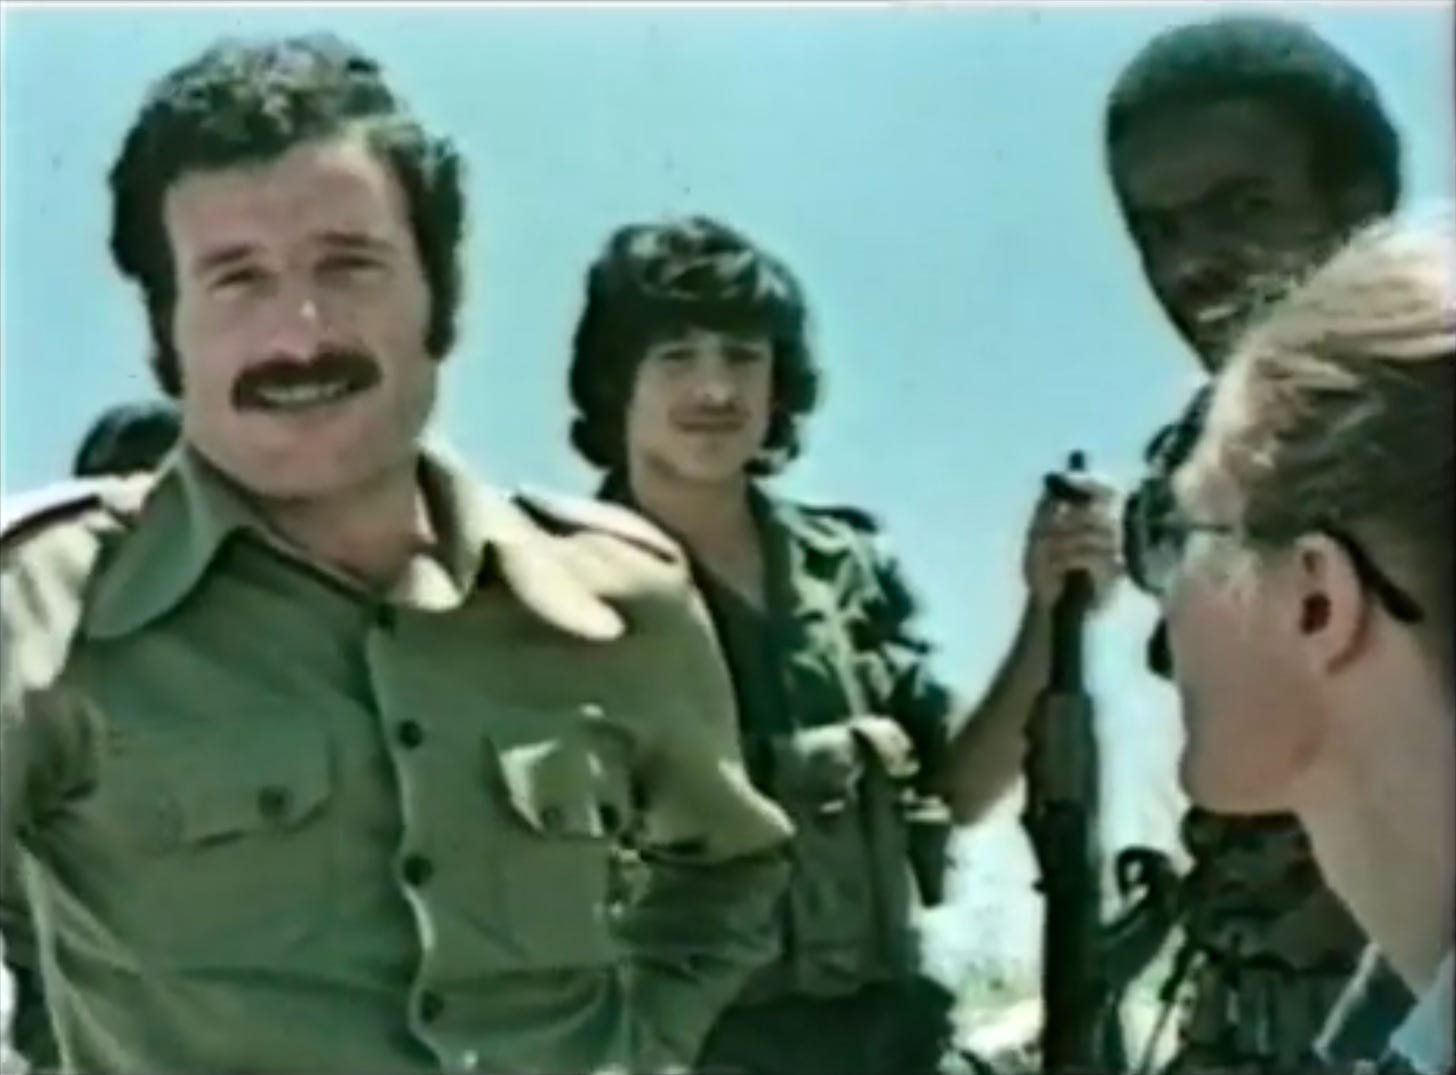 Still from "The Palestinian" (1977)